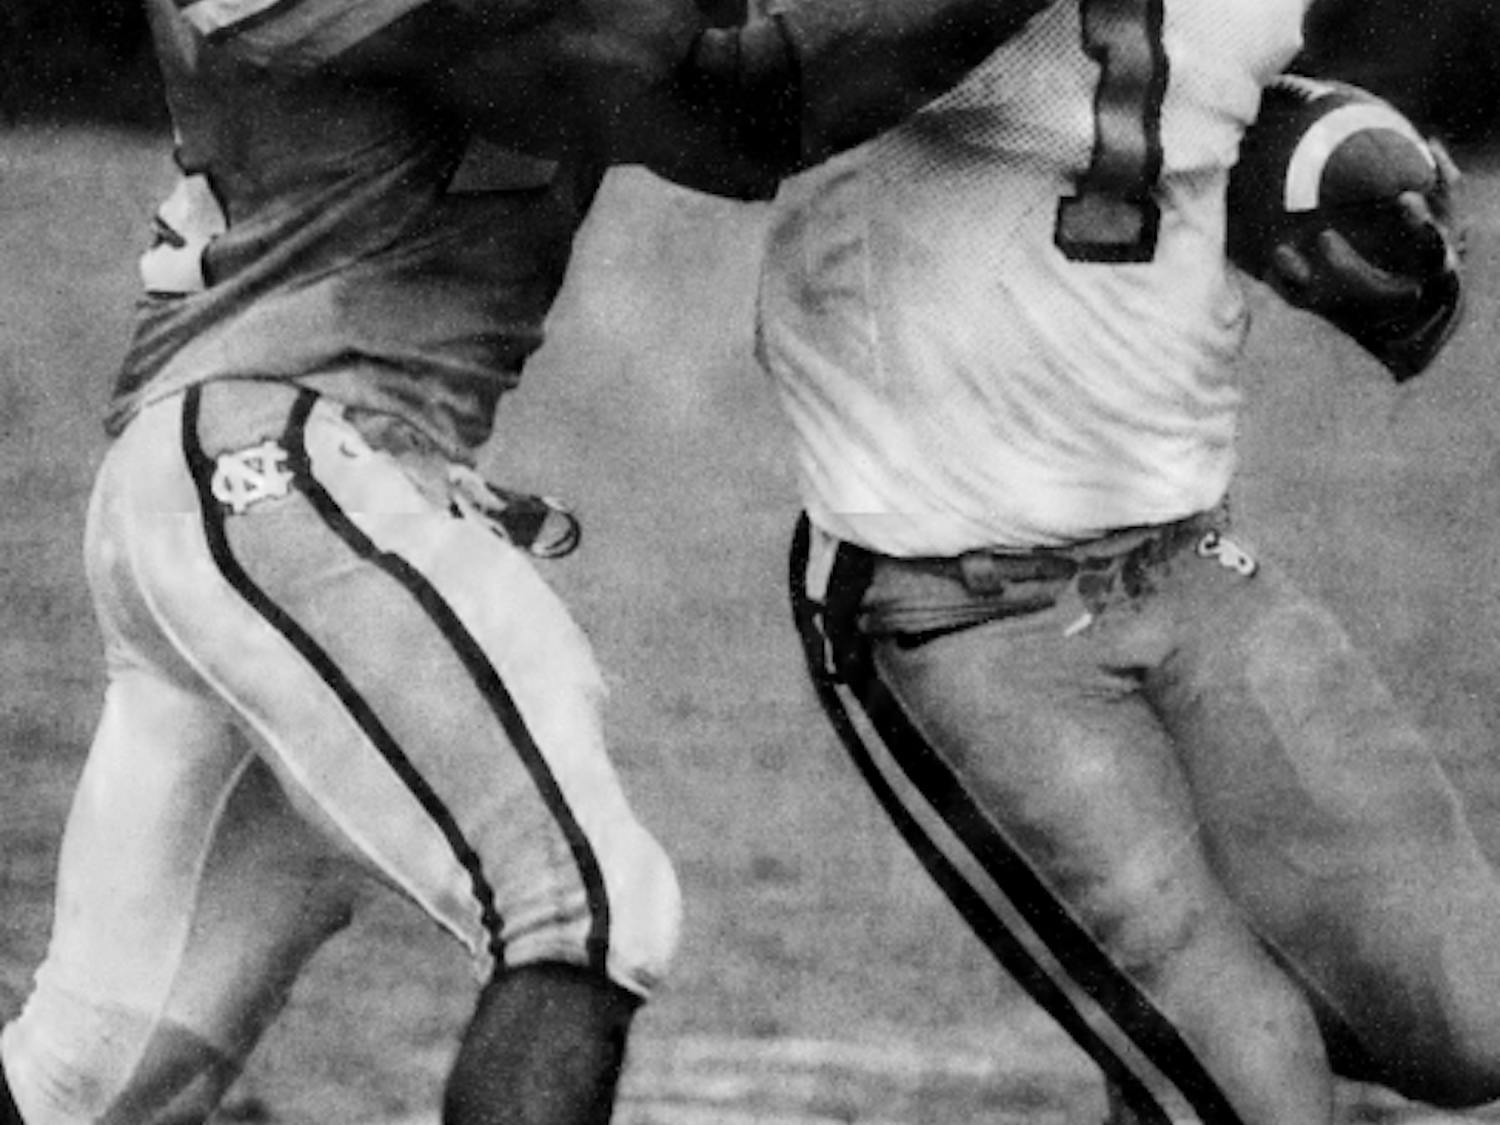 DTH Archive. Syracuse running back Damien Rhodes (1) fights off UNC safety Dexter Reid in the Orangemen's triple-overtime win. Syracuse overcame a 17-point third quarter deficit to tie the game on a field goal. Photo by Kimberly Craven.  